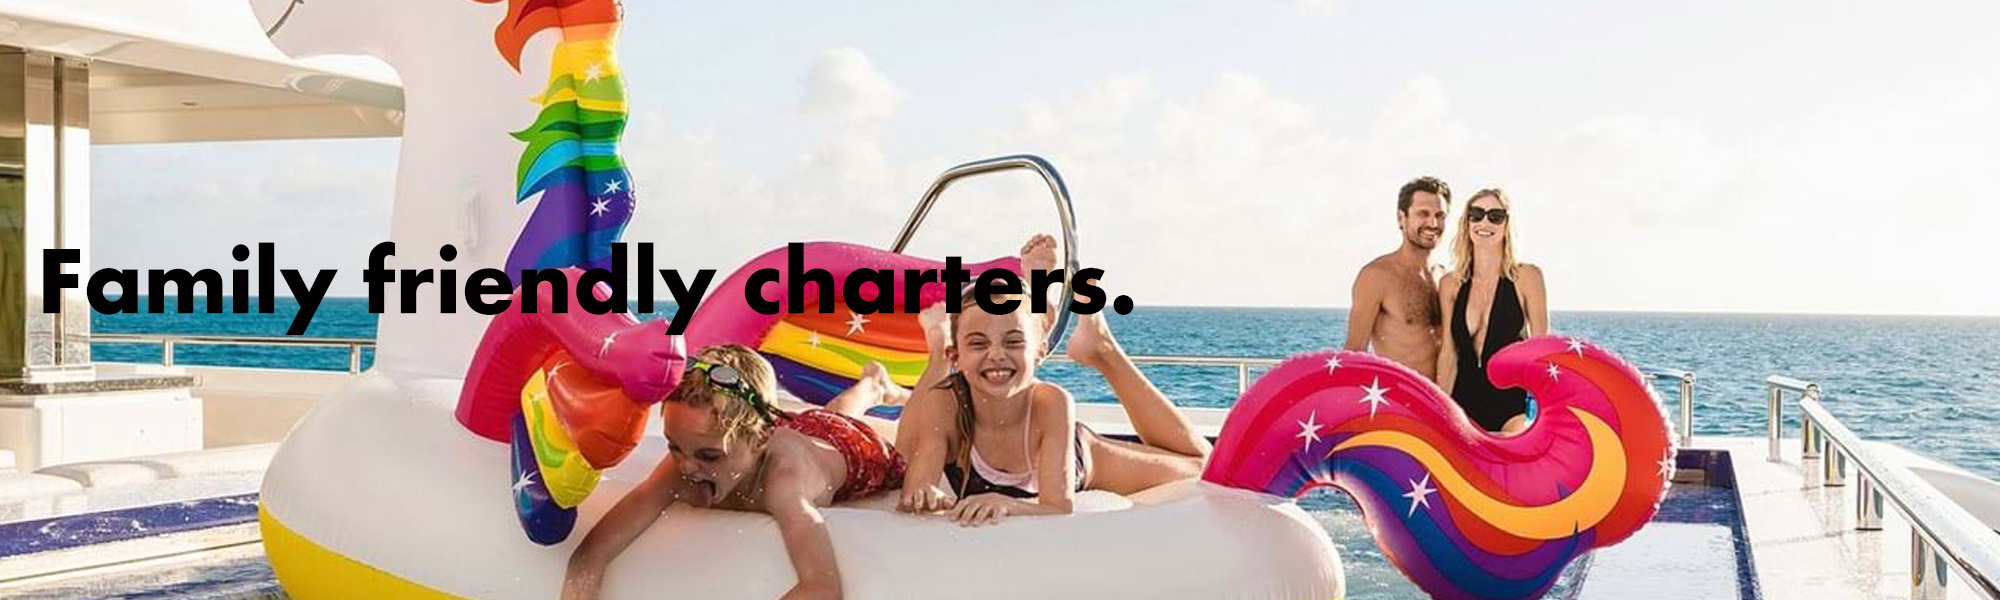 Family Friendly Charters.